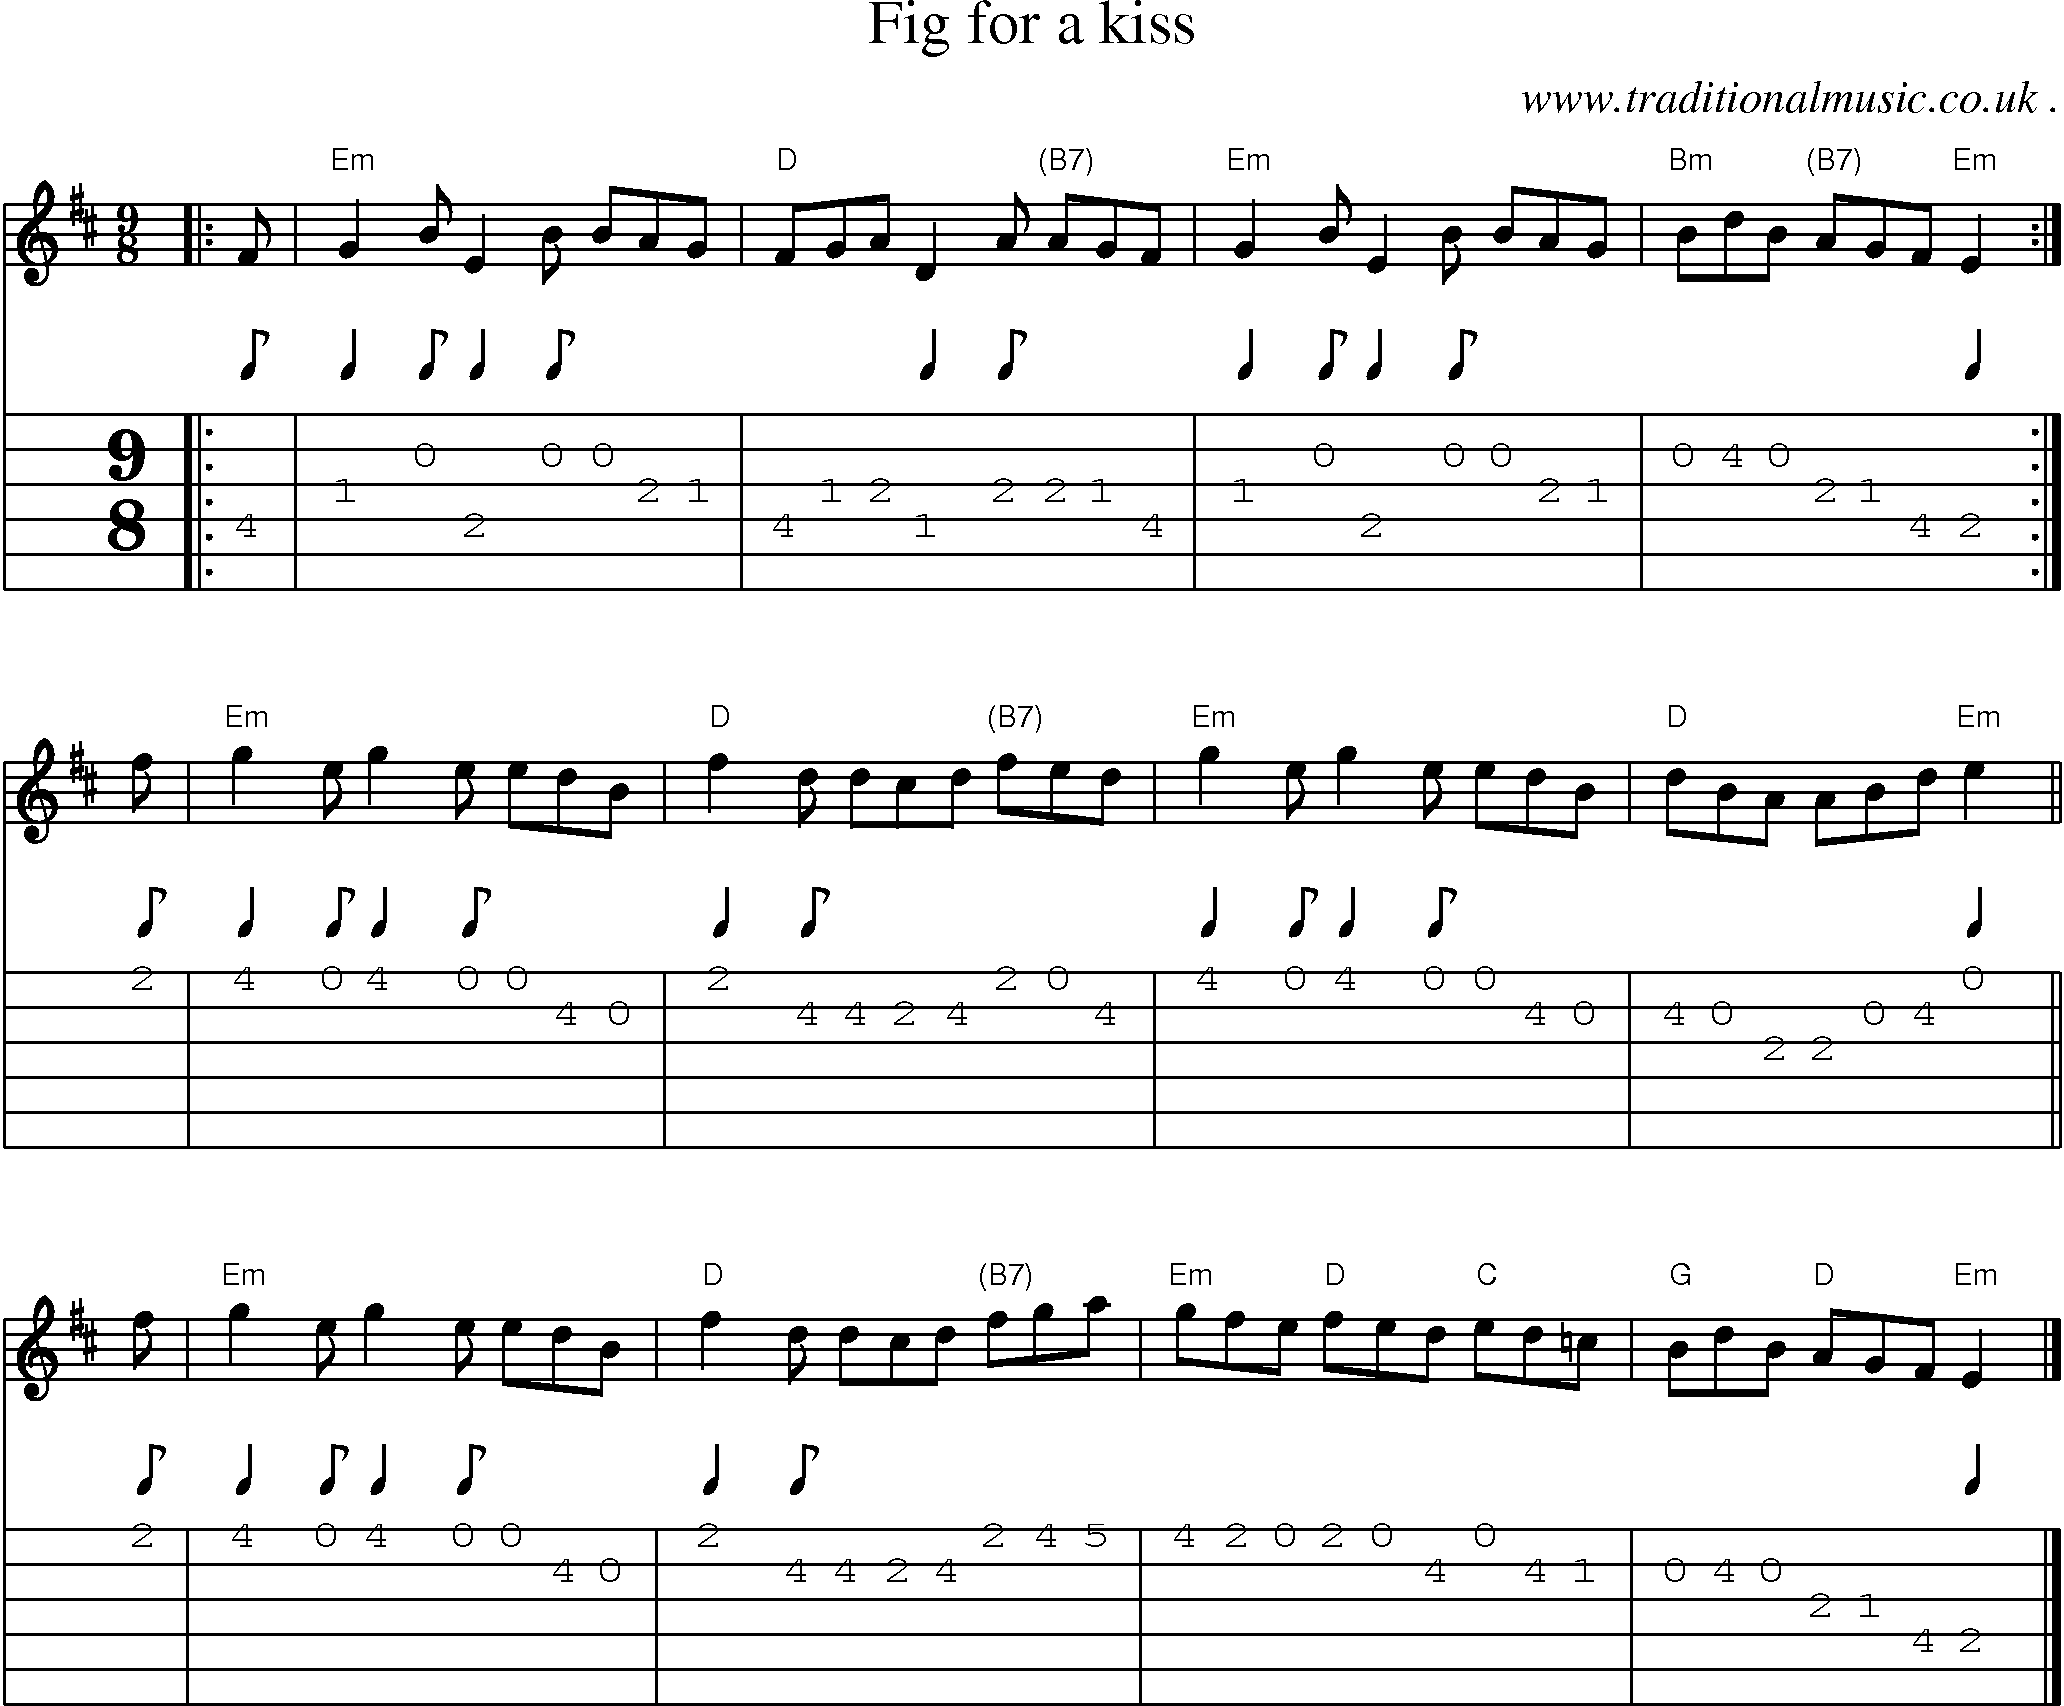 Sheet-music  score, Chords and Guitar Tabs for Fig For A Kiss